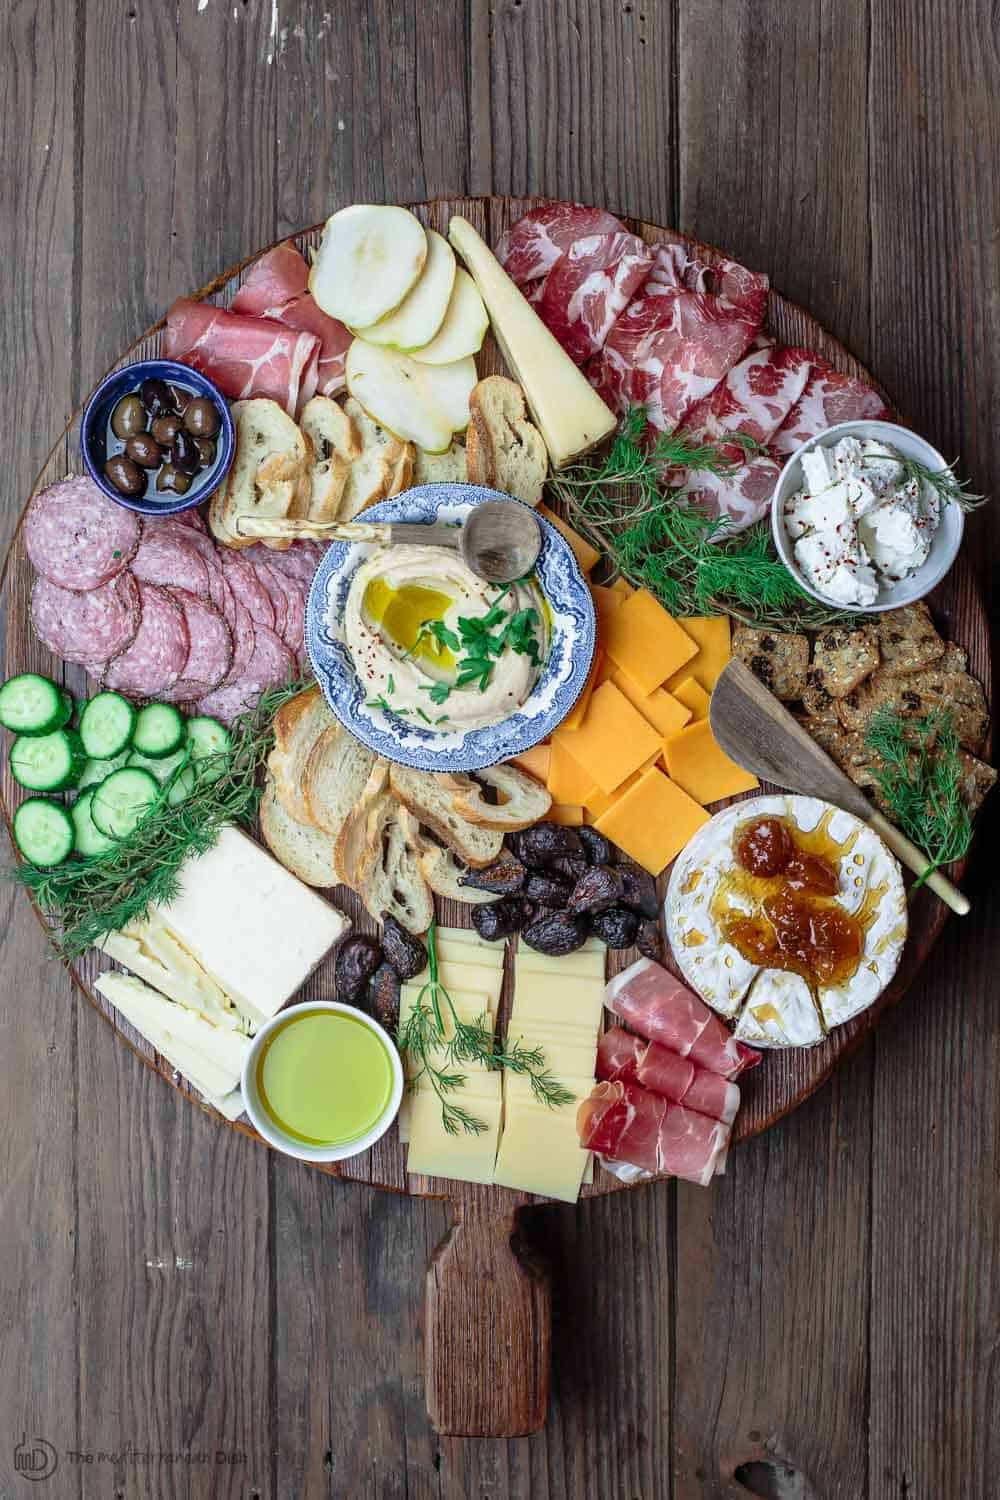 How to Build the Perfect Cheese Board - Thechowdown